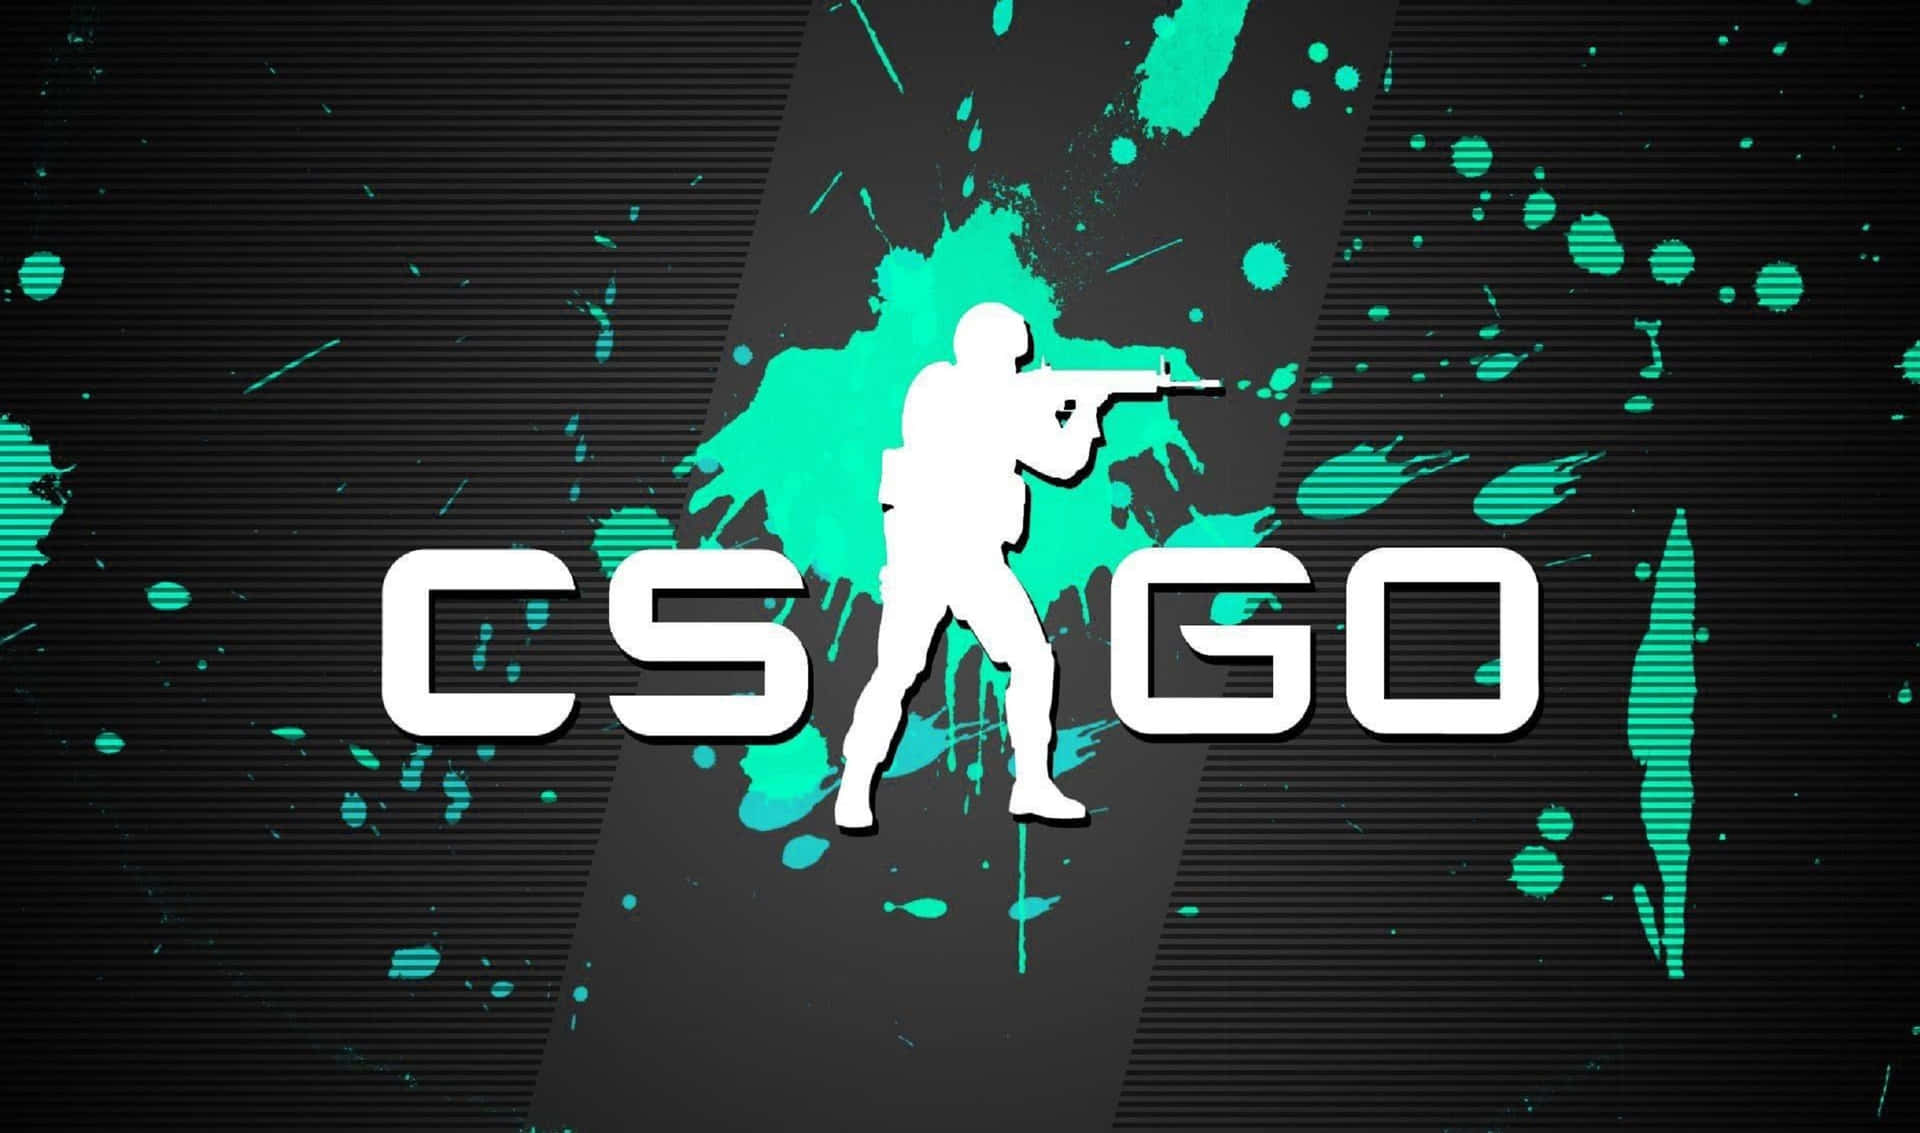 Go for the high score in Counter-Strike Global Offensive!